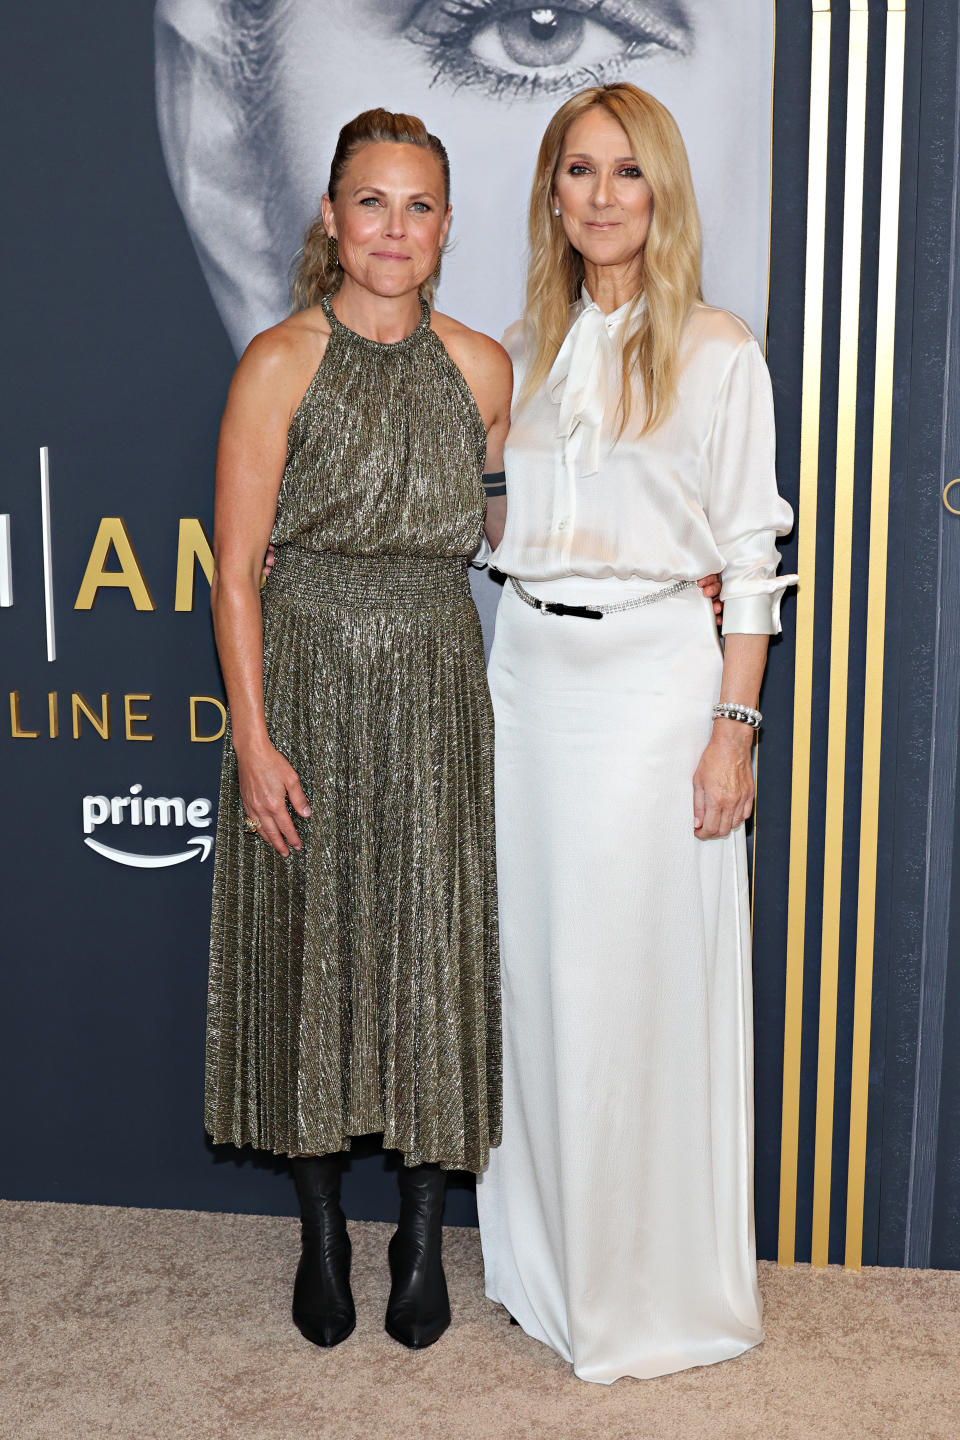 Céline Dion and Irene Taylor attend the "I Am: Celine Dion" New York special screening